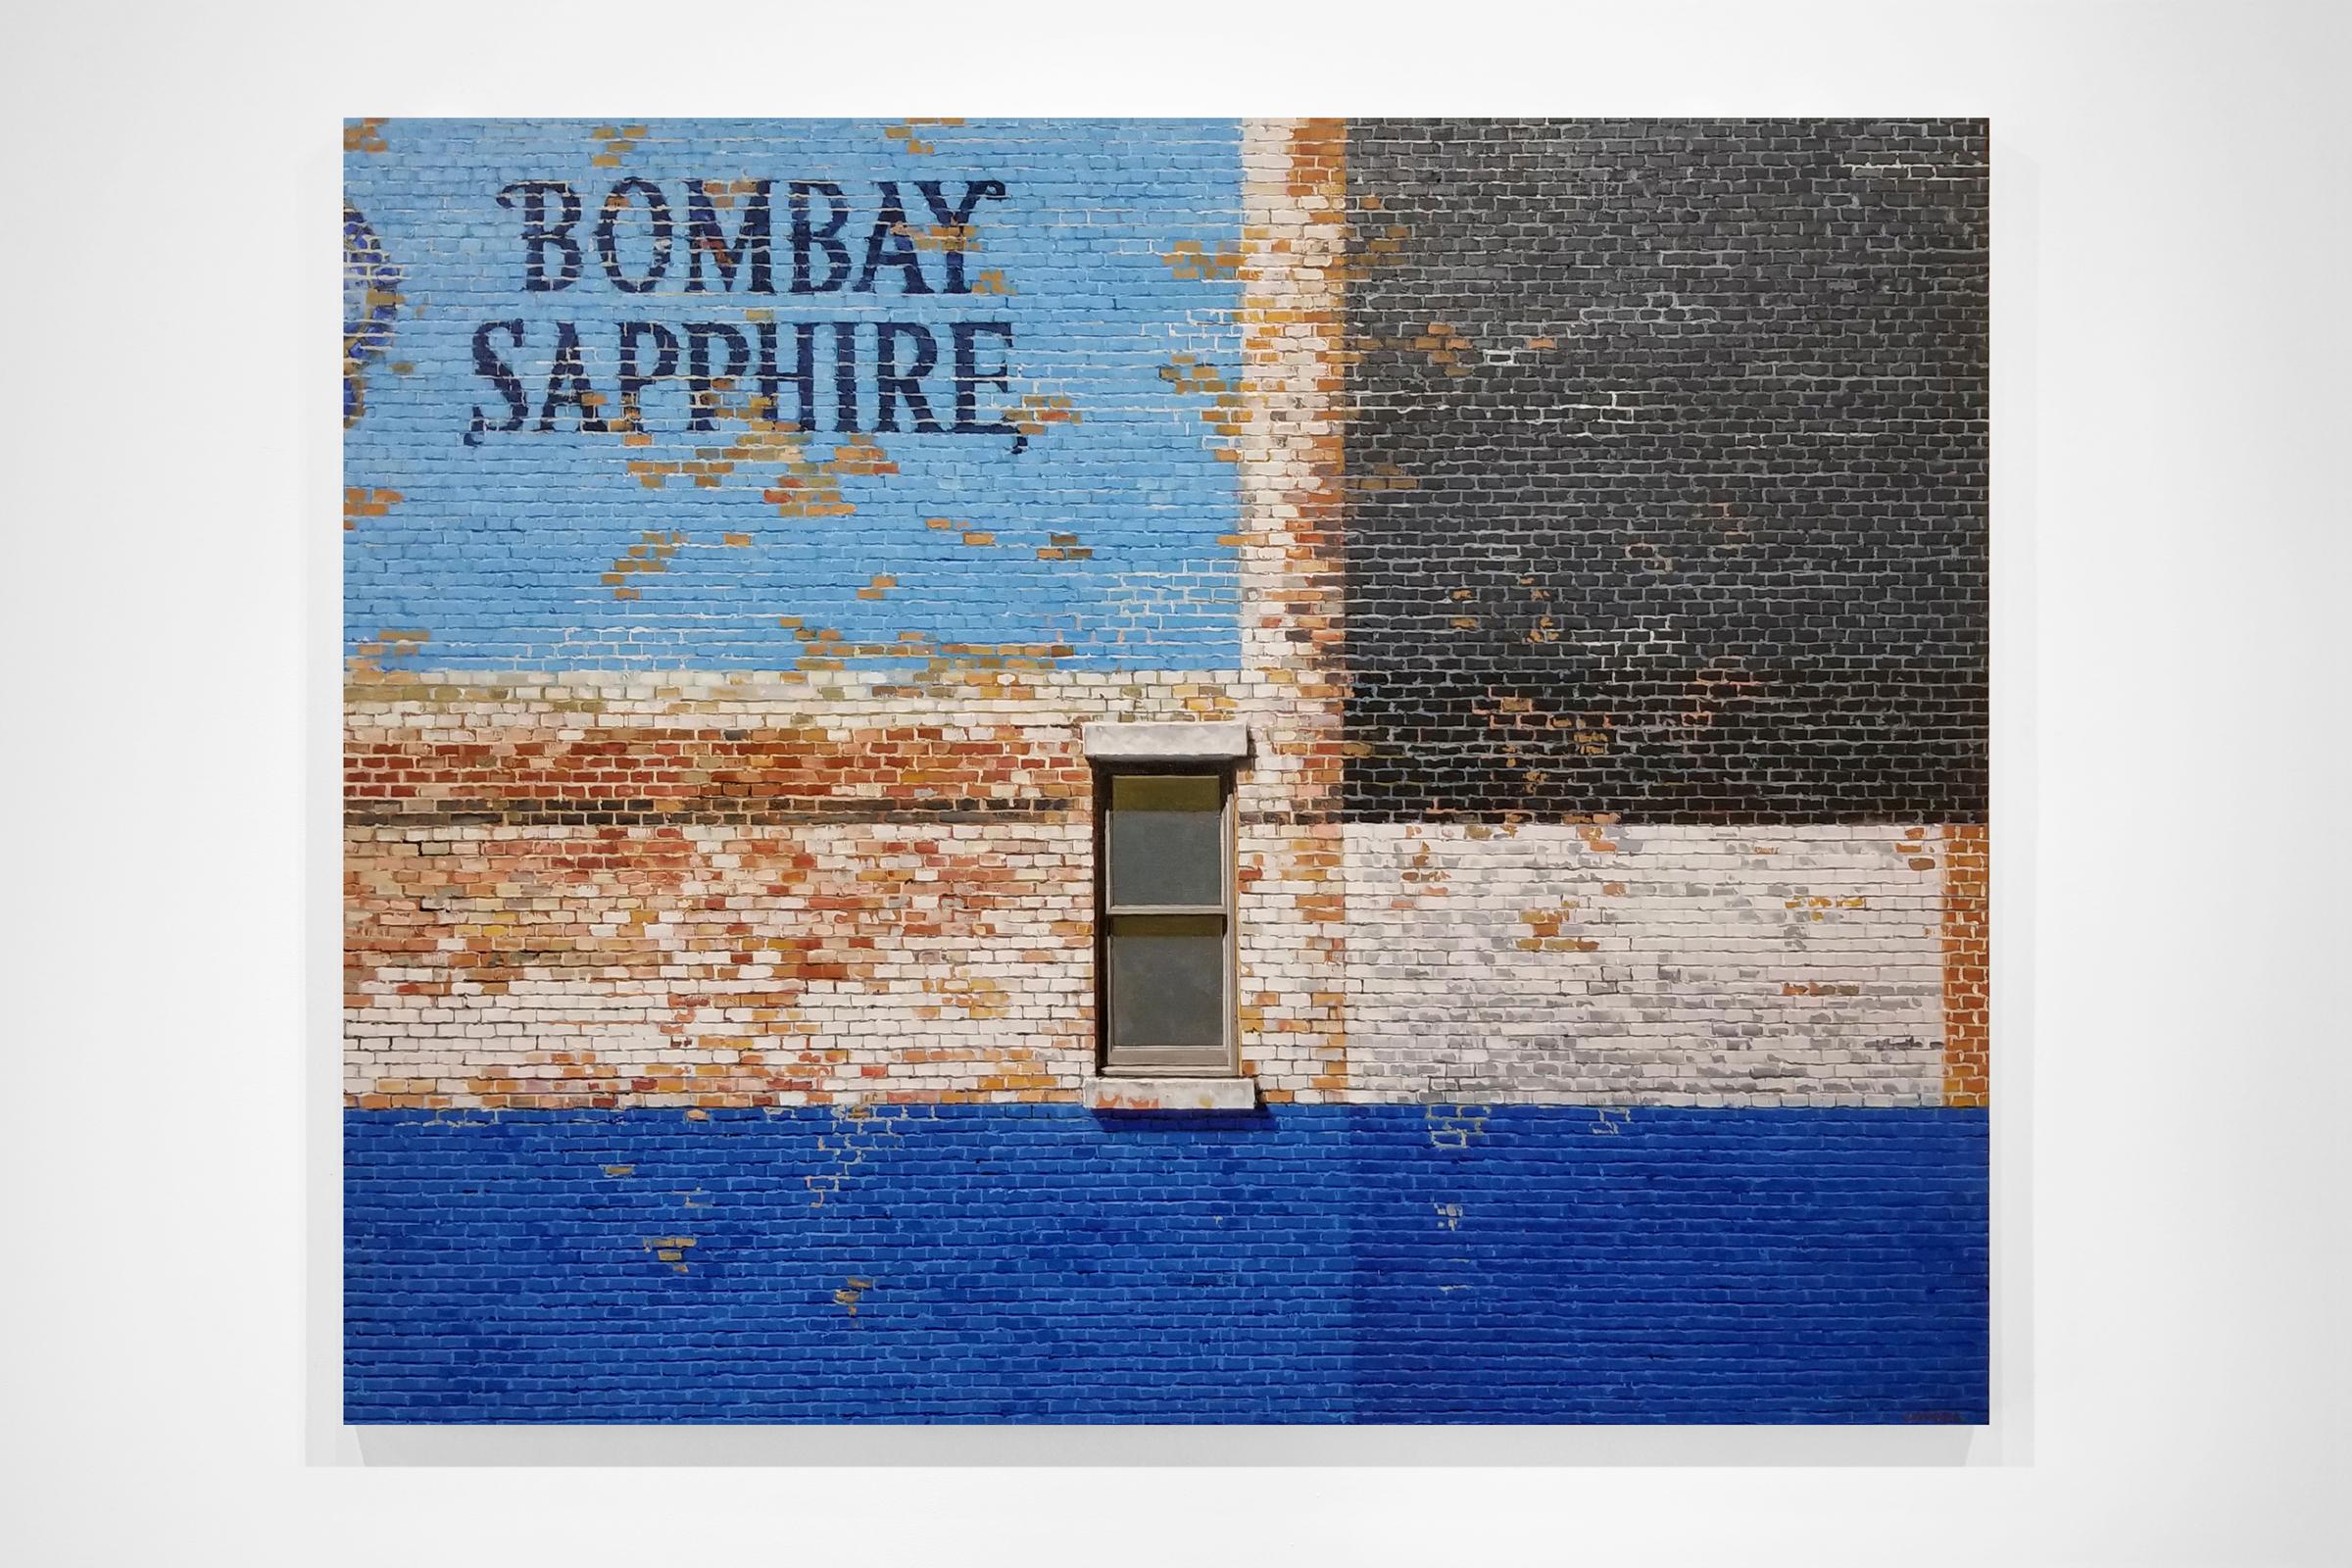 GHOST SIGN ON A WALL - Photorealism / Contemporary Cityscape / Bombay Sapphire - Painting by Richard Combes